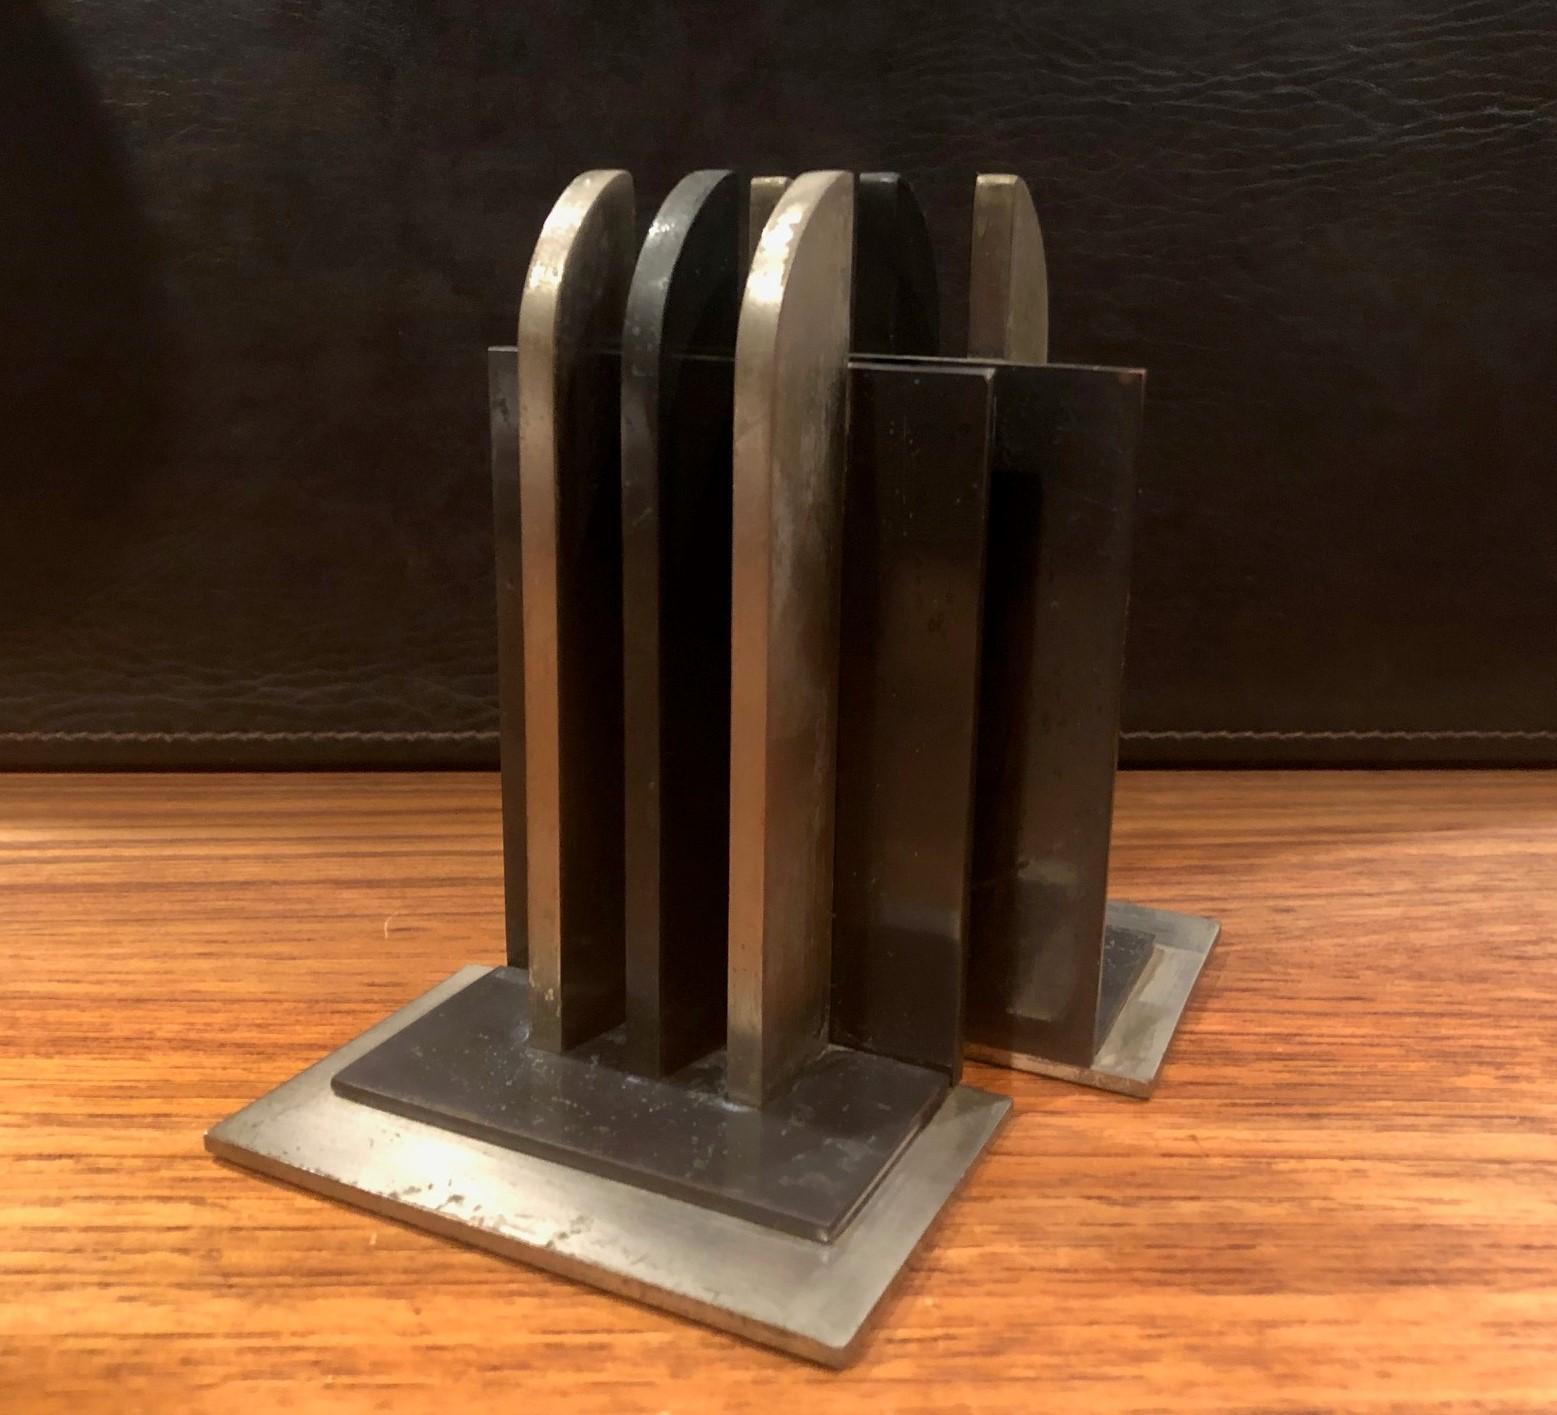 Gorgeous pair of Machine Age or Art Deco bookends by Walter Von Nessen for Chase & Co., circa 1930s. These are solid brass bookends with three perpendicular rounded beams along a square back and have a satin nickel and blackened nickel finish. The